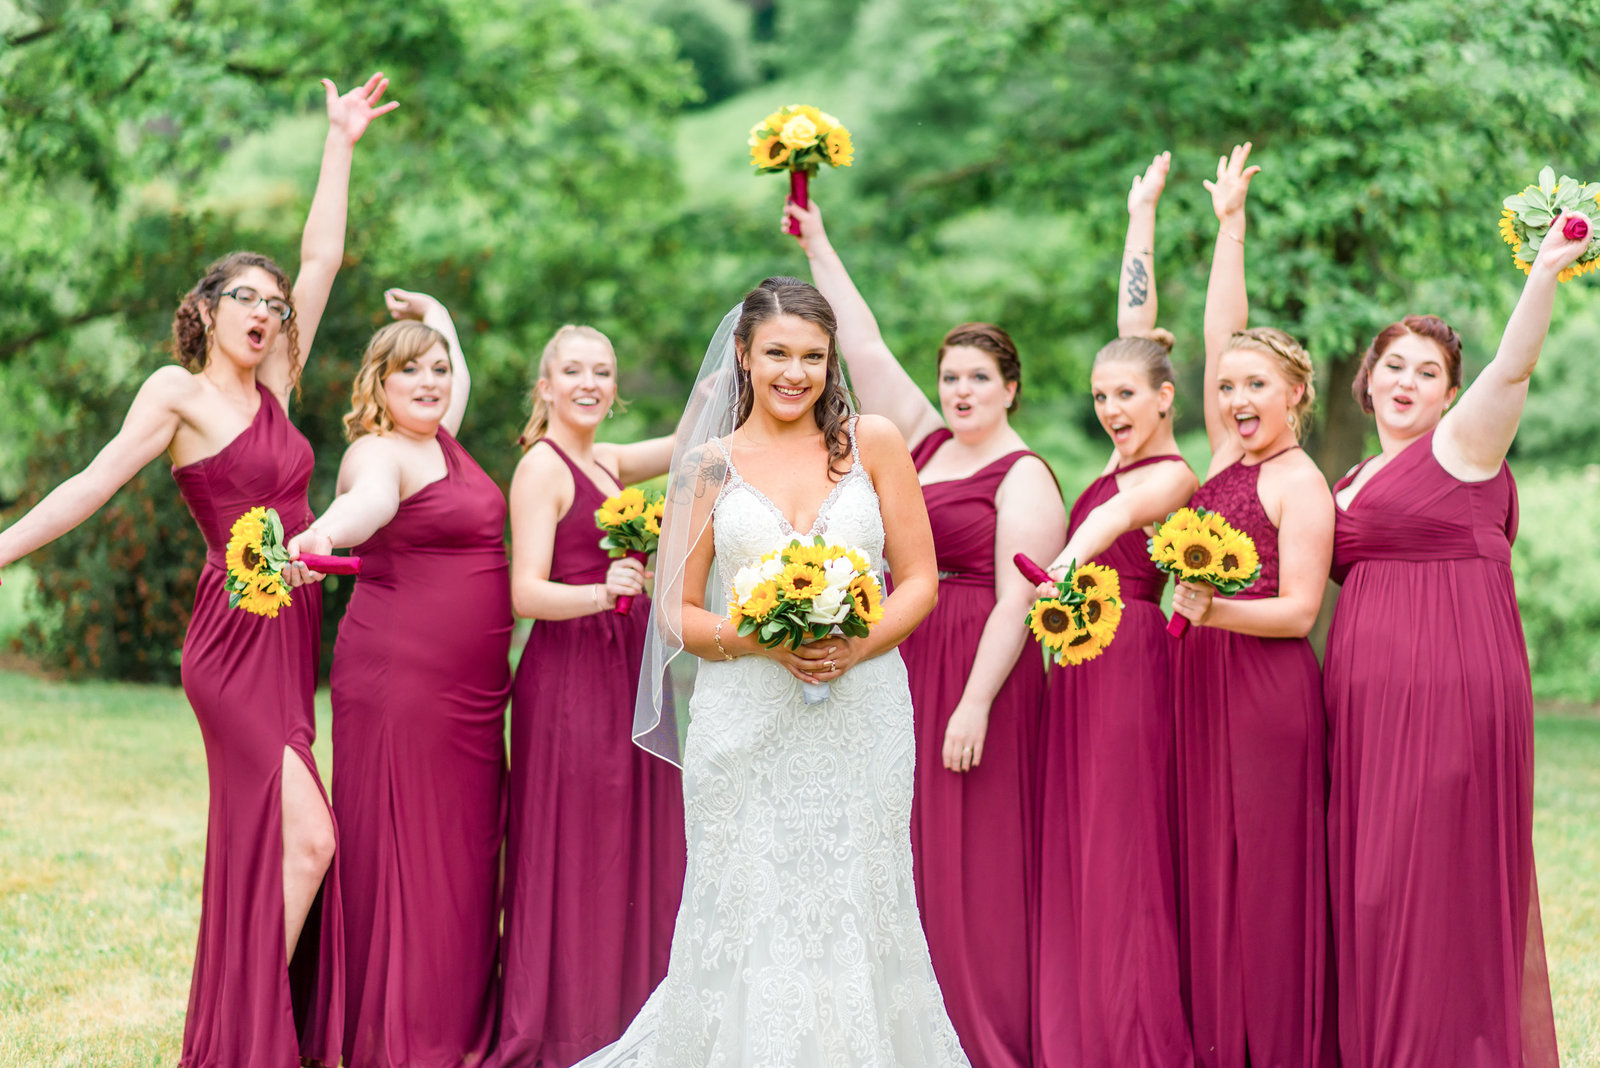 Bridesmaids in plum colored dresses cheer for the bride